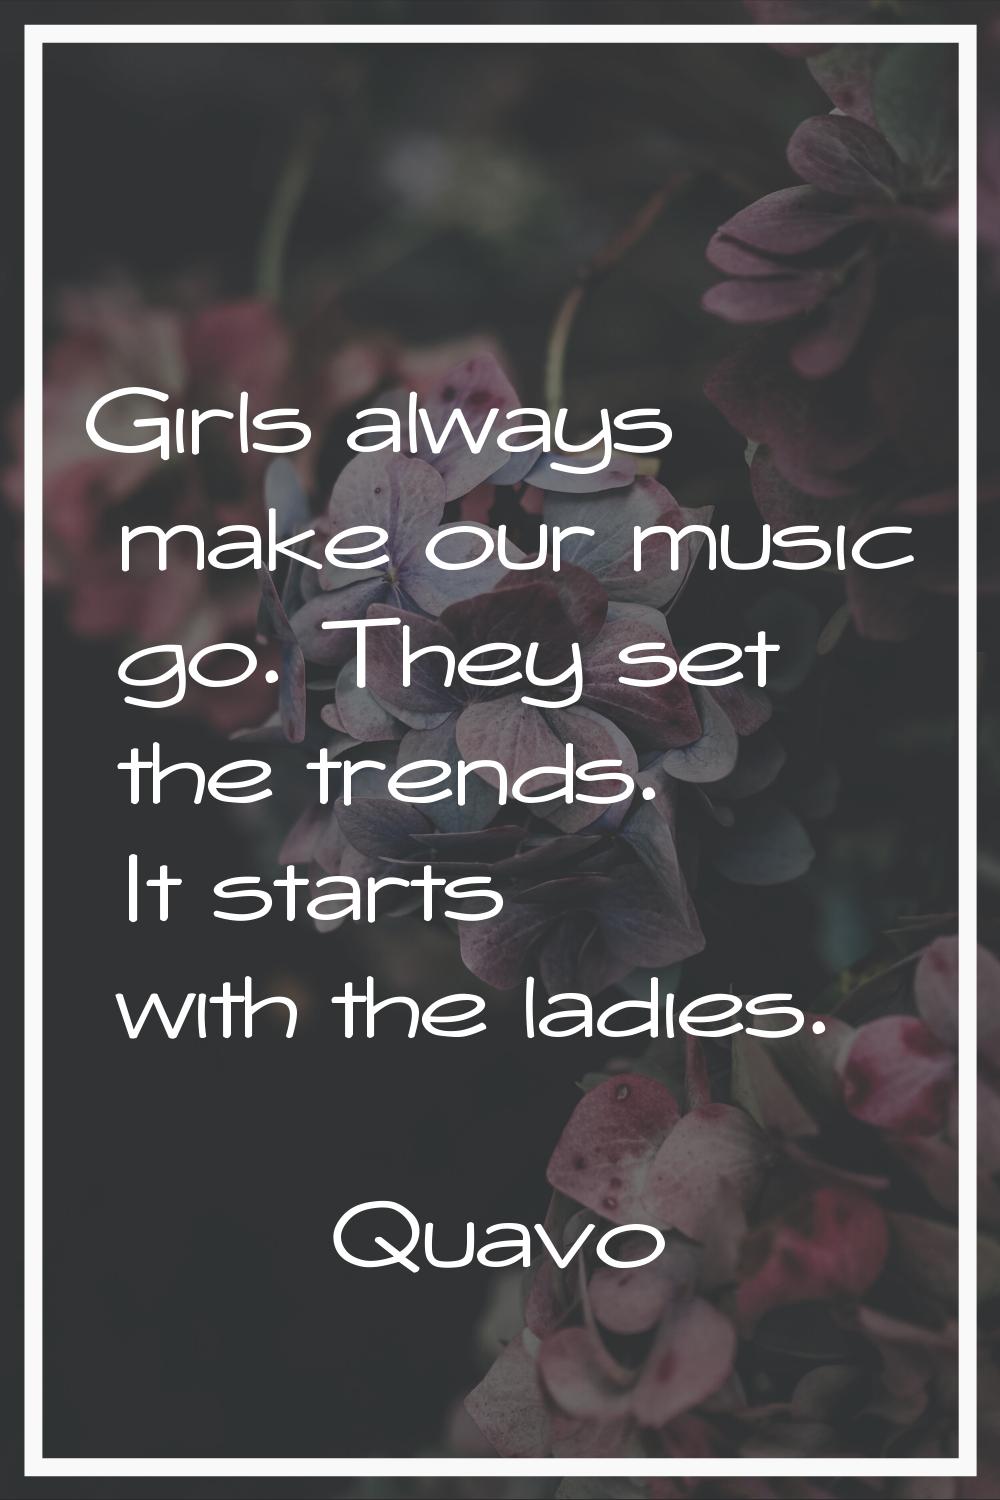 Girls always make our music go. They set the trends. It starts with the ladies.